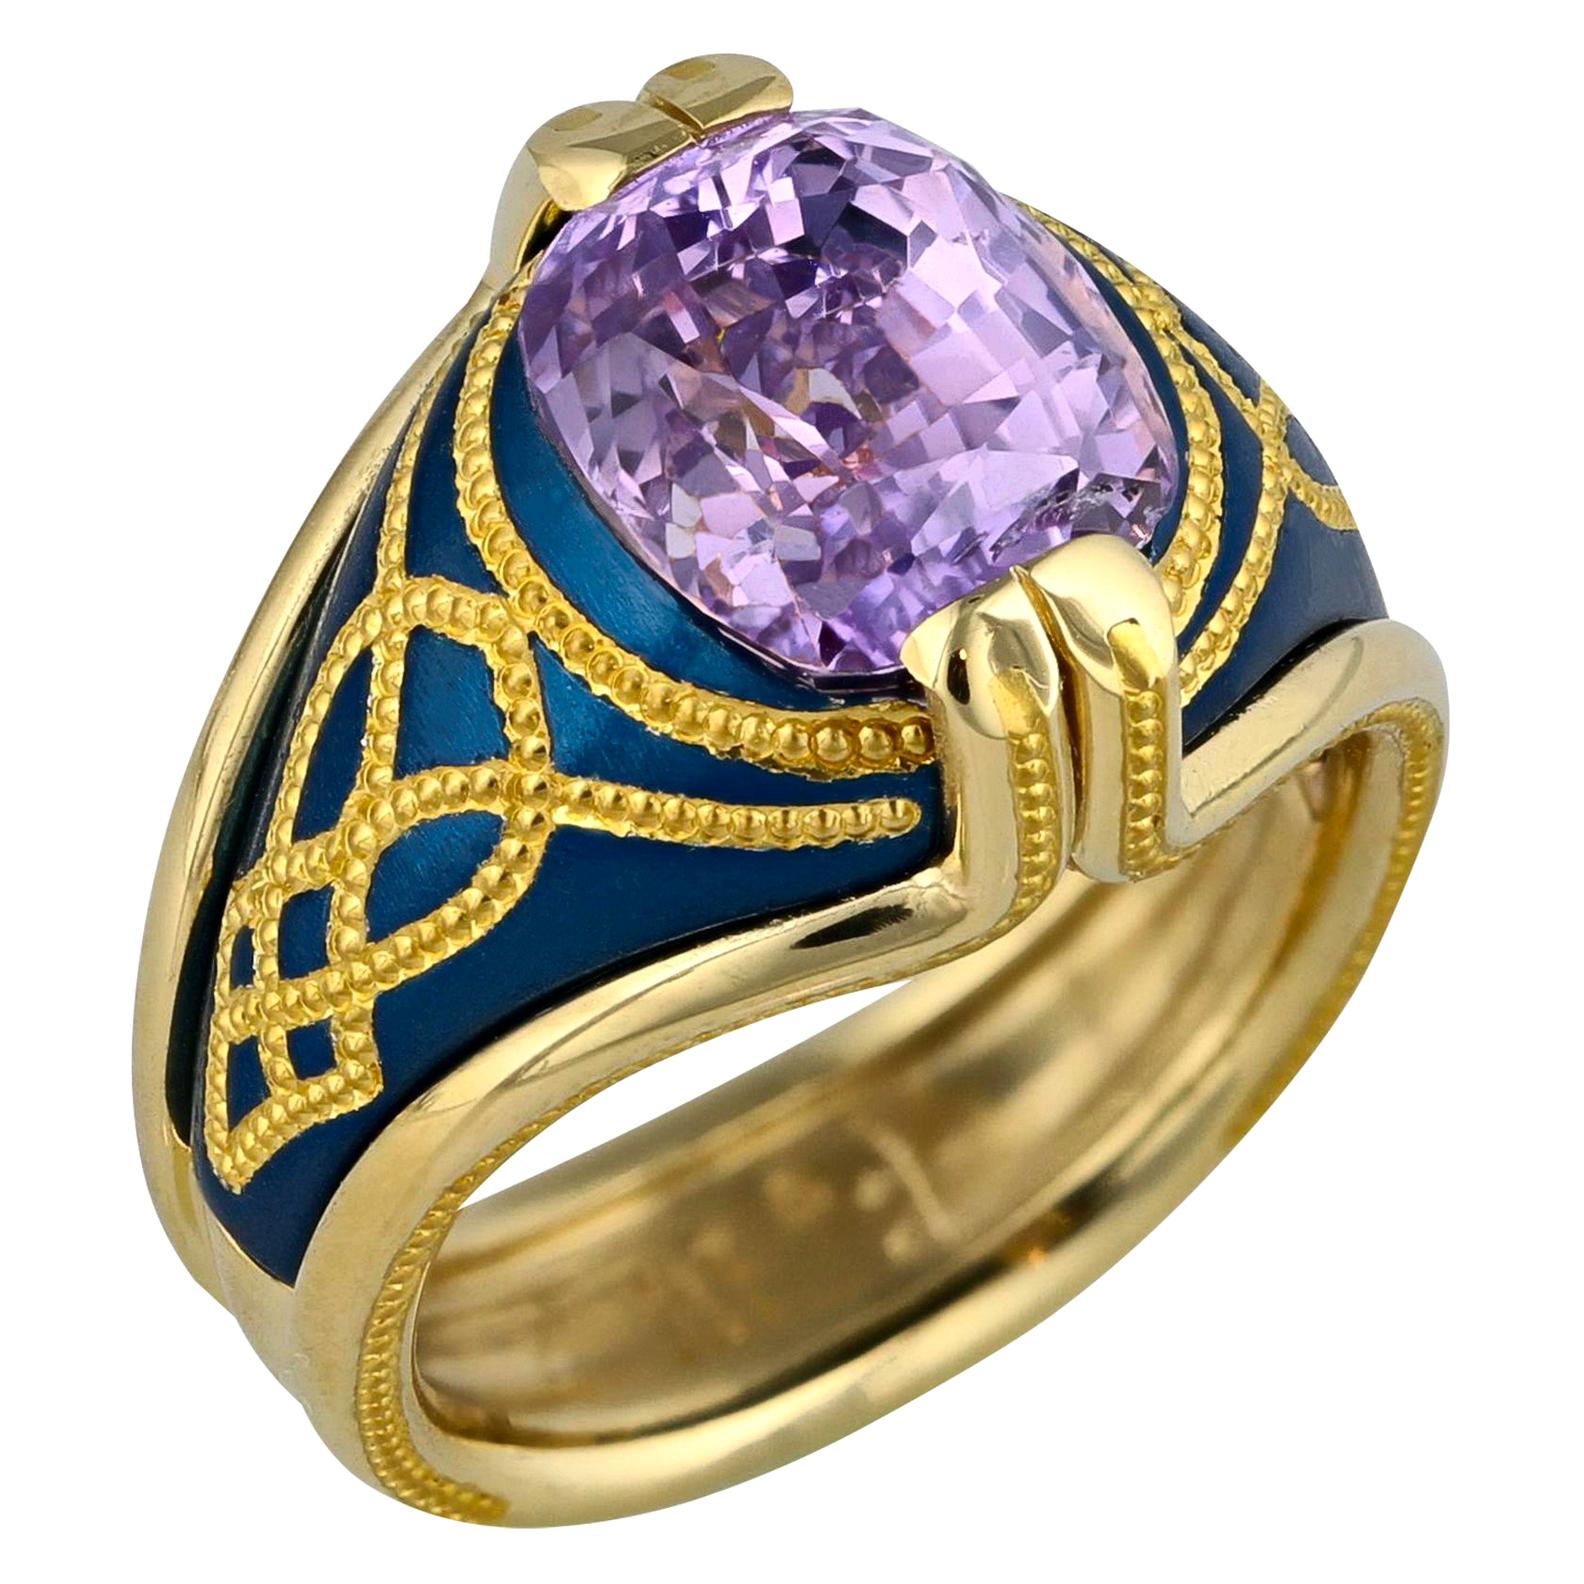 Lavender Sapphire Ring in Blue and Gold by Zoltan David For Sale